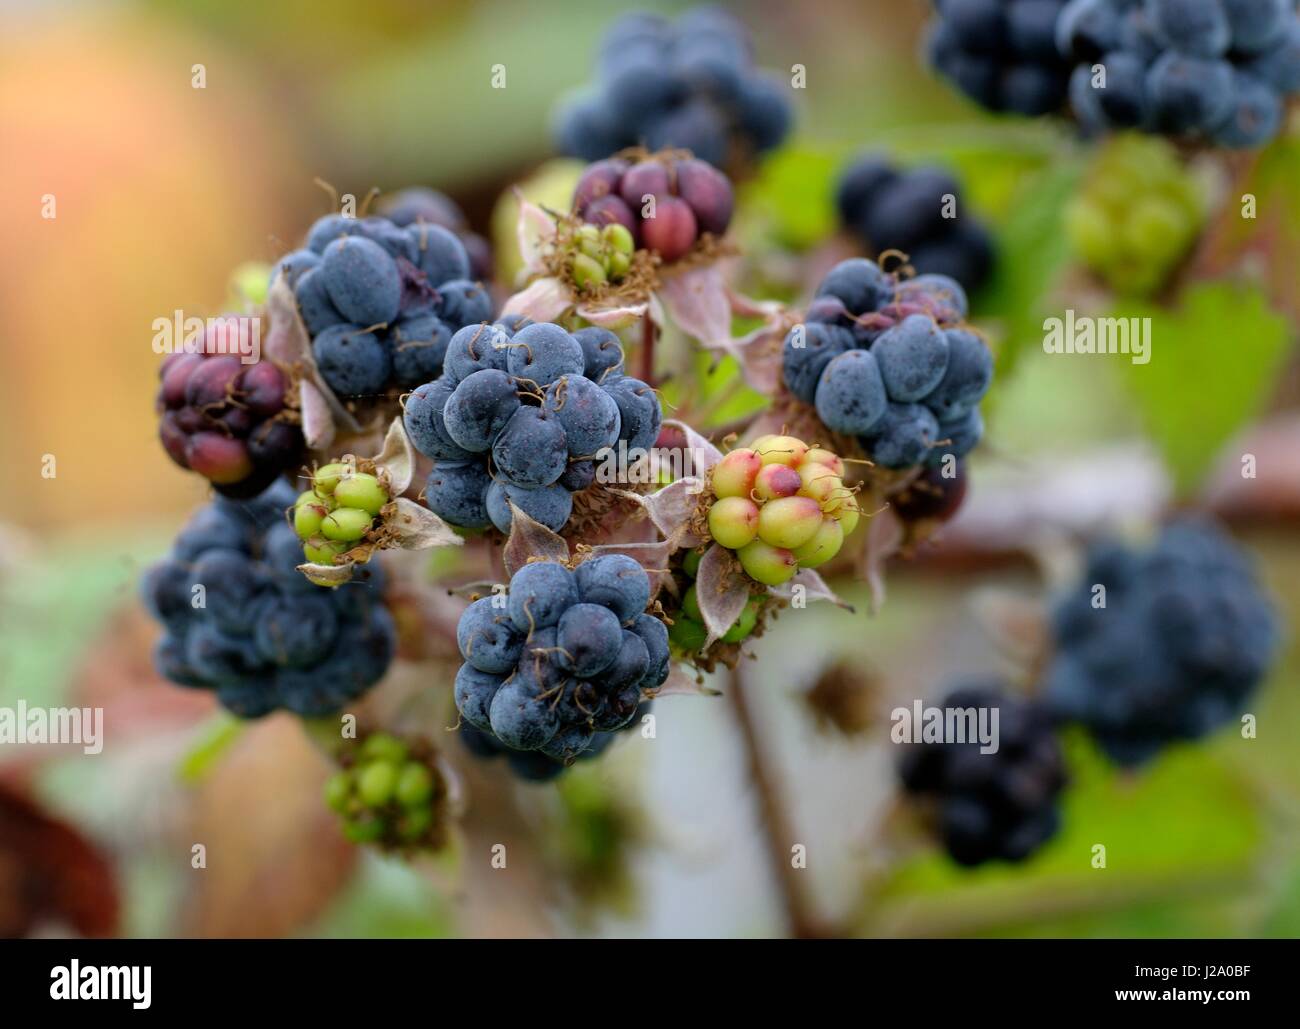 Dewberry fruit in close-up Stock Photo